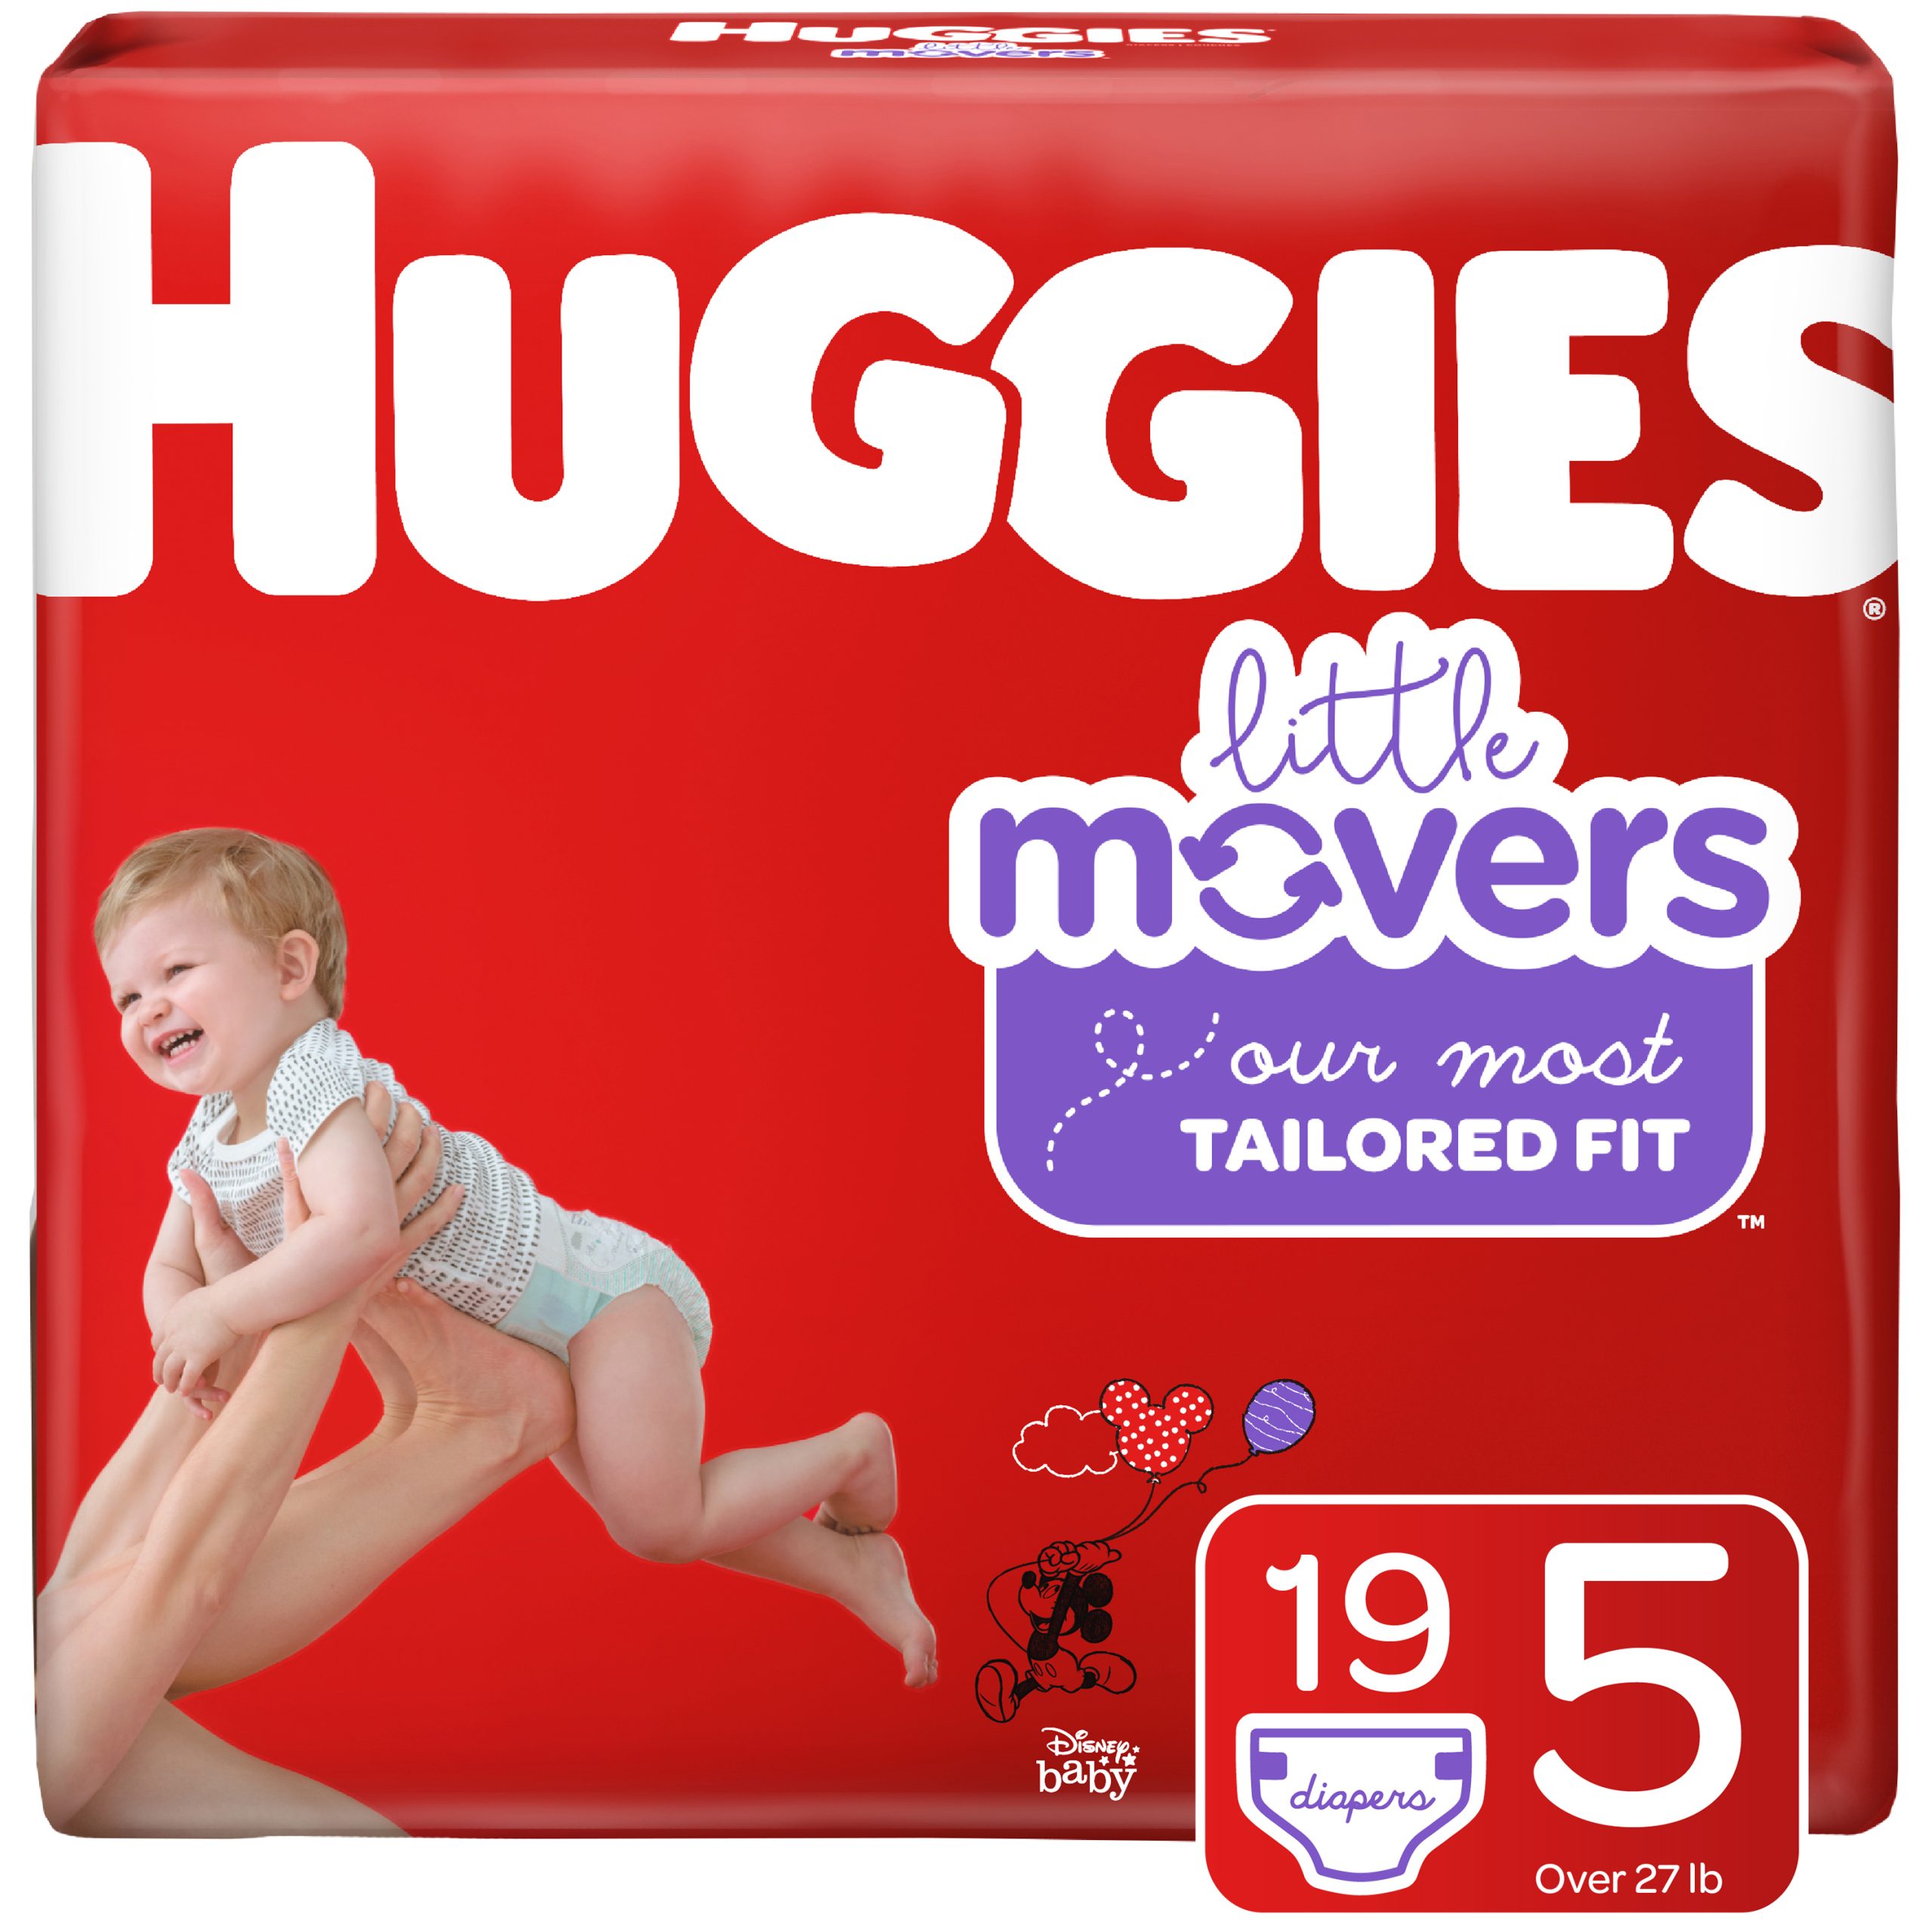 Head Into Publix For Great Deals On Huggies Diapers, Pull-Ups AND GoodNites! on I Heart Publix